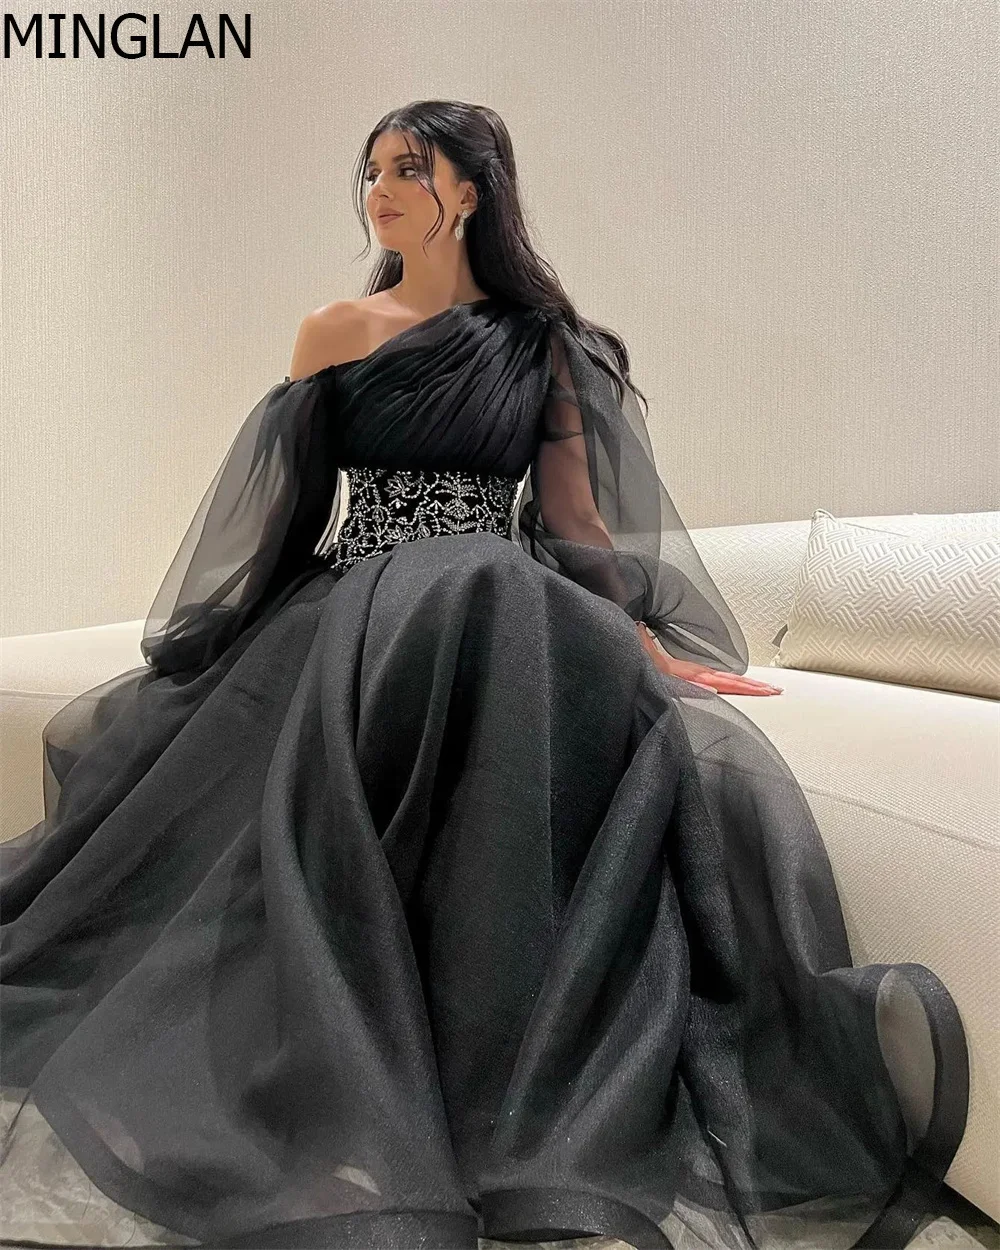 

MINGLAN Elegant One Shoulder Full Puff Sleeve A Line Long Black Evening Dress Sequined Floor Length Sweep Train Prom Gown New